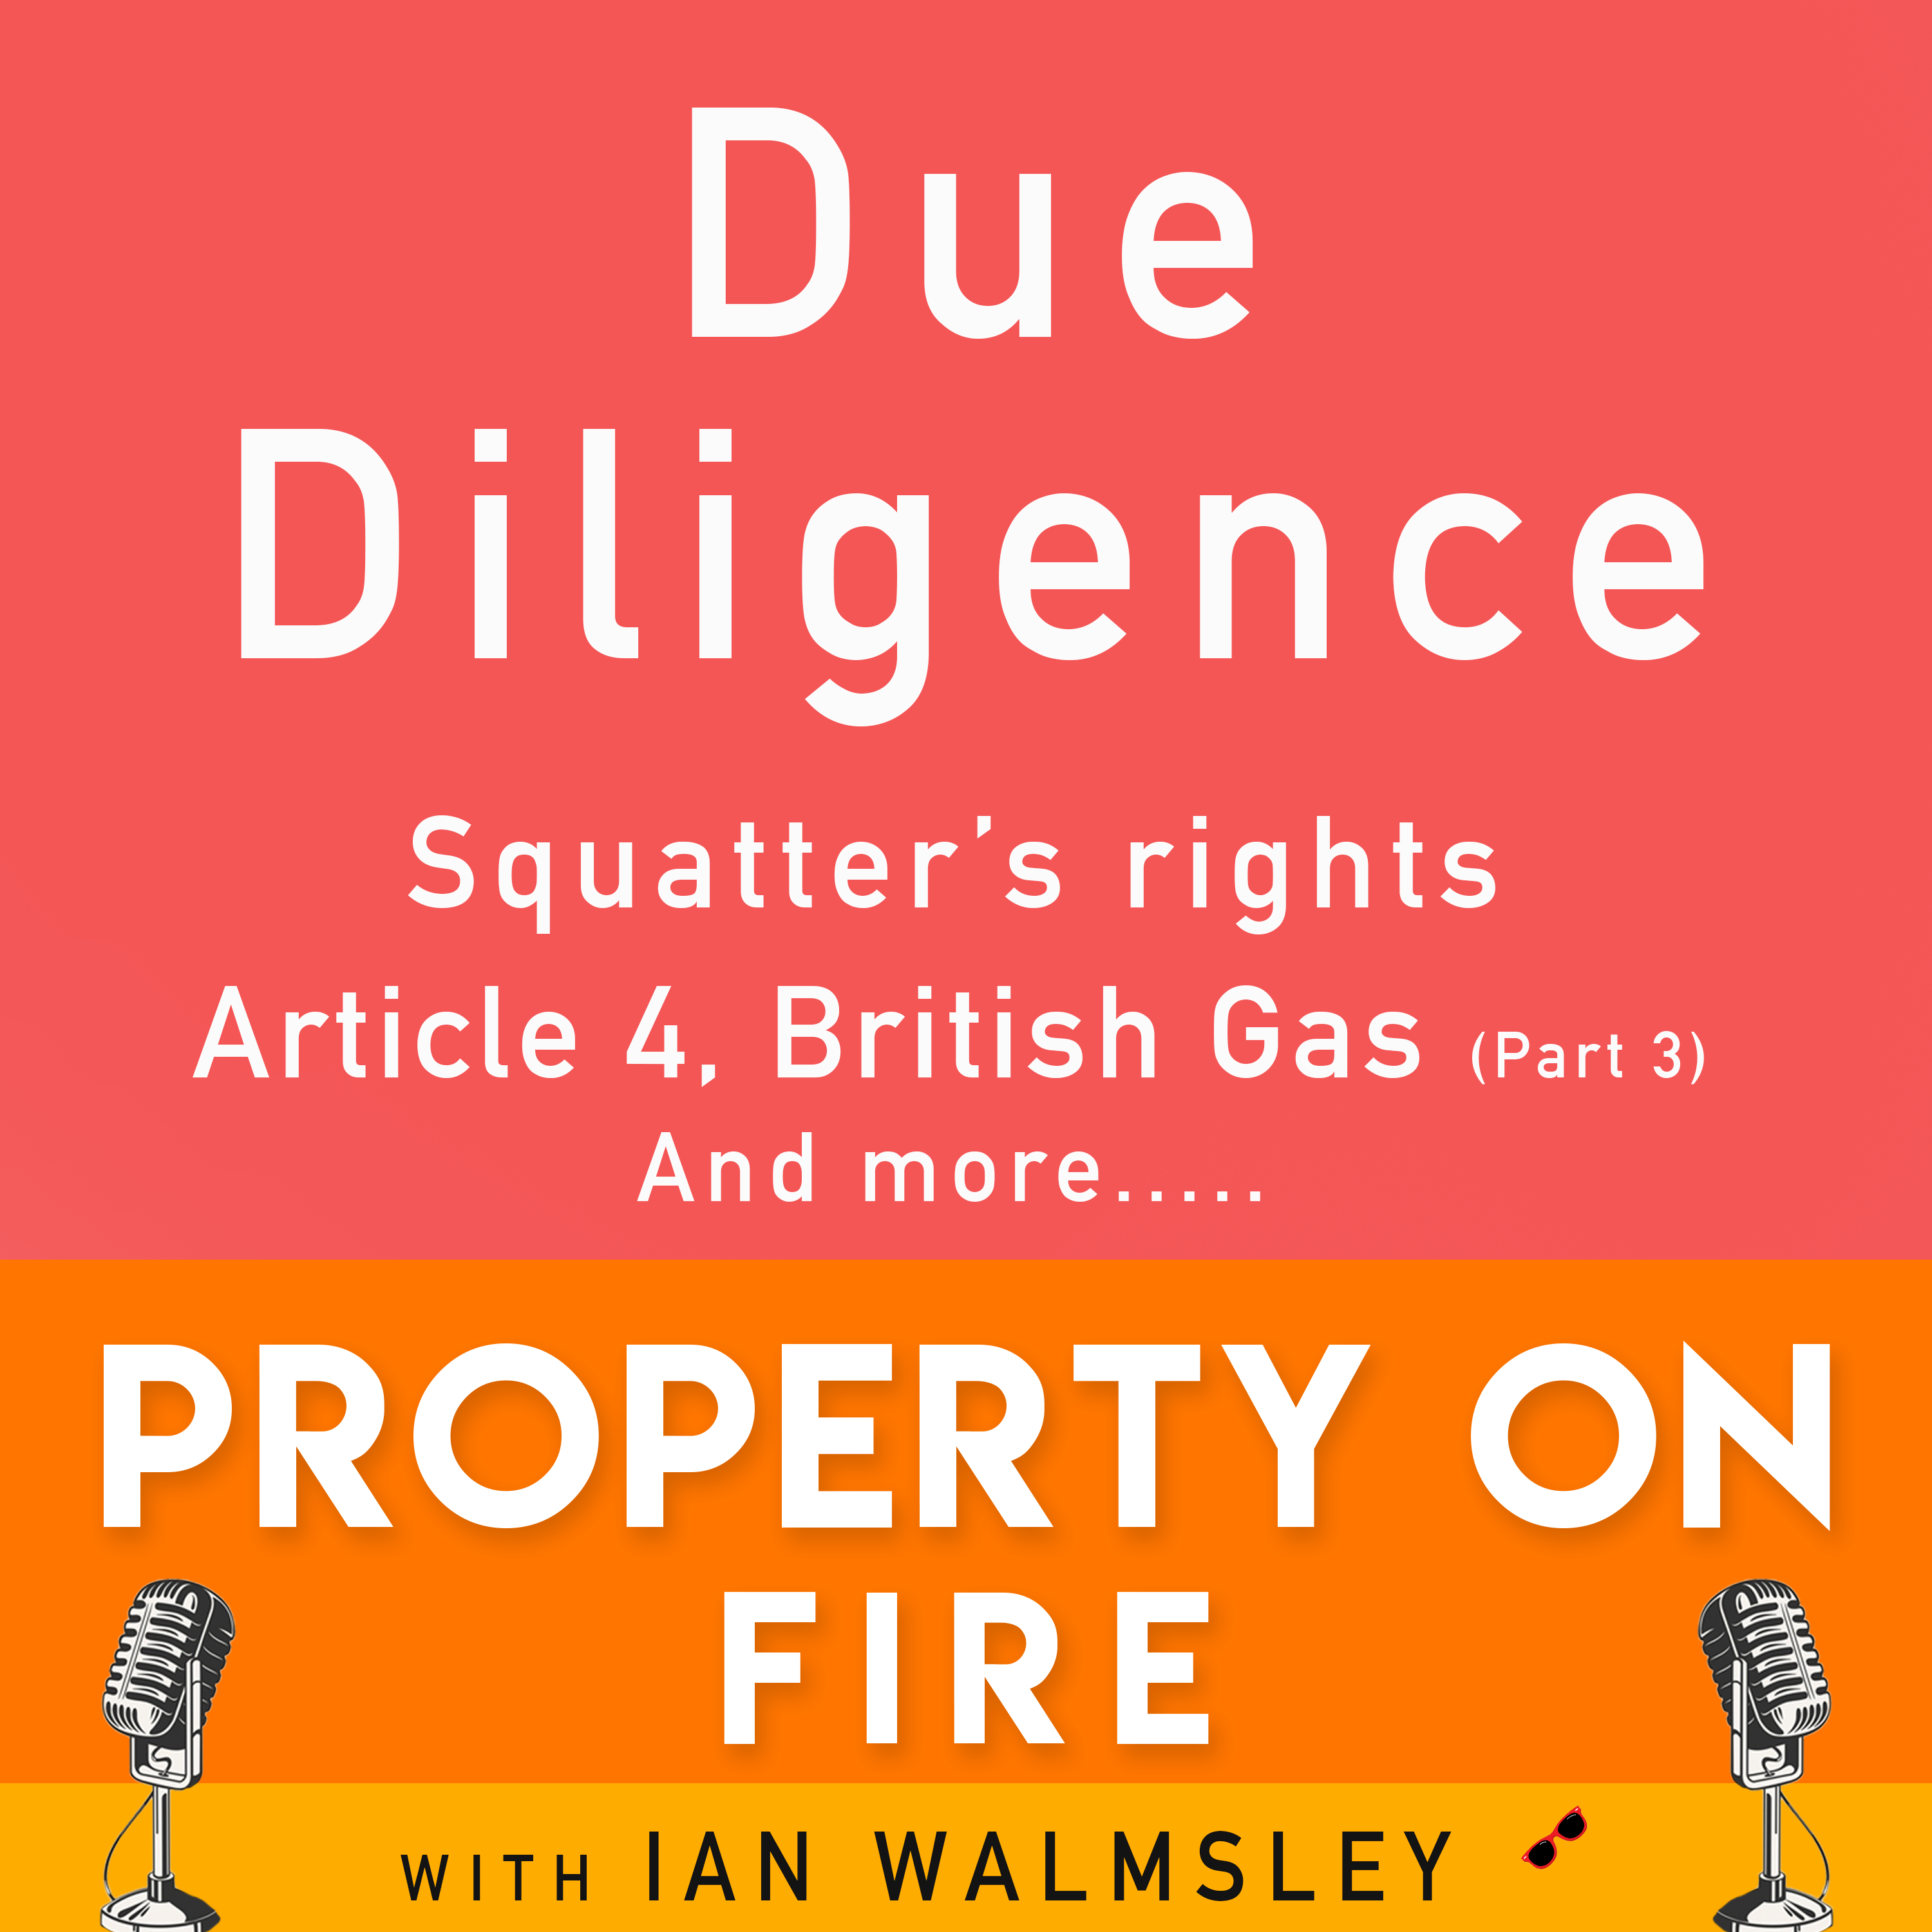 #024 Due diligence, Squatter's rights, Article 4 & more!